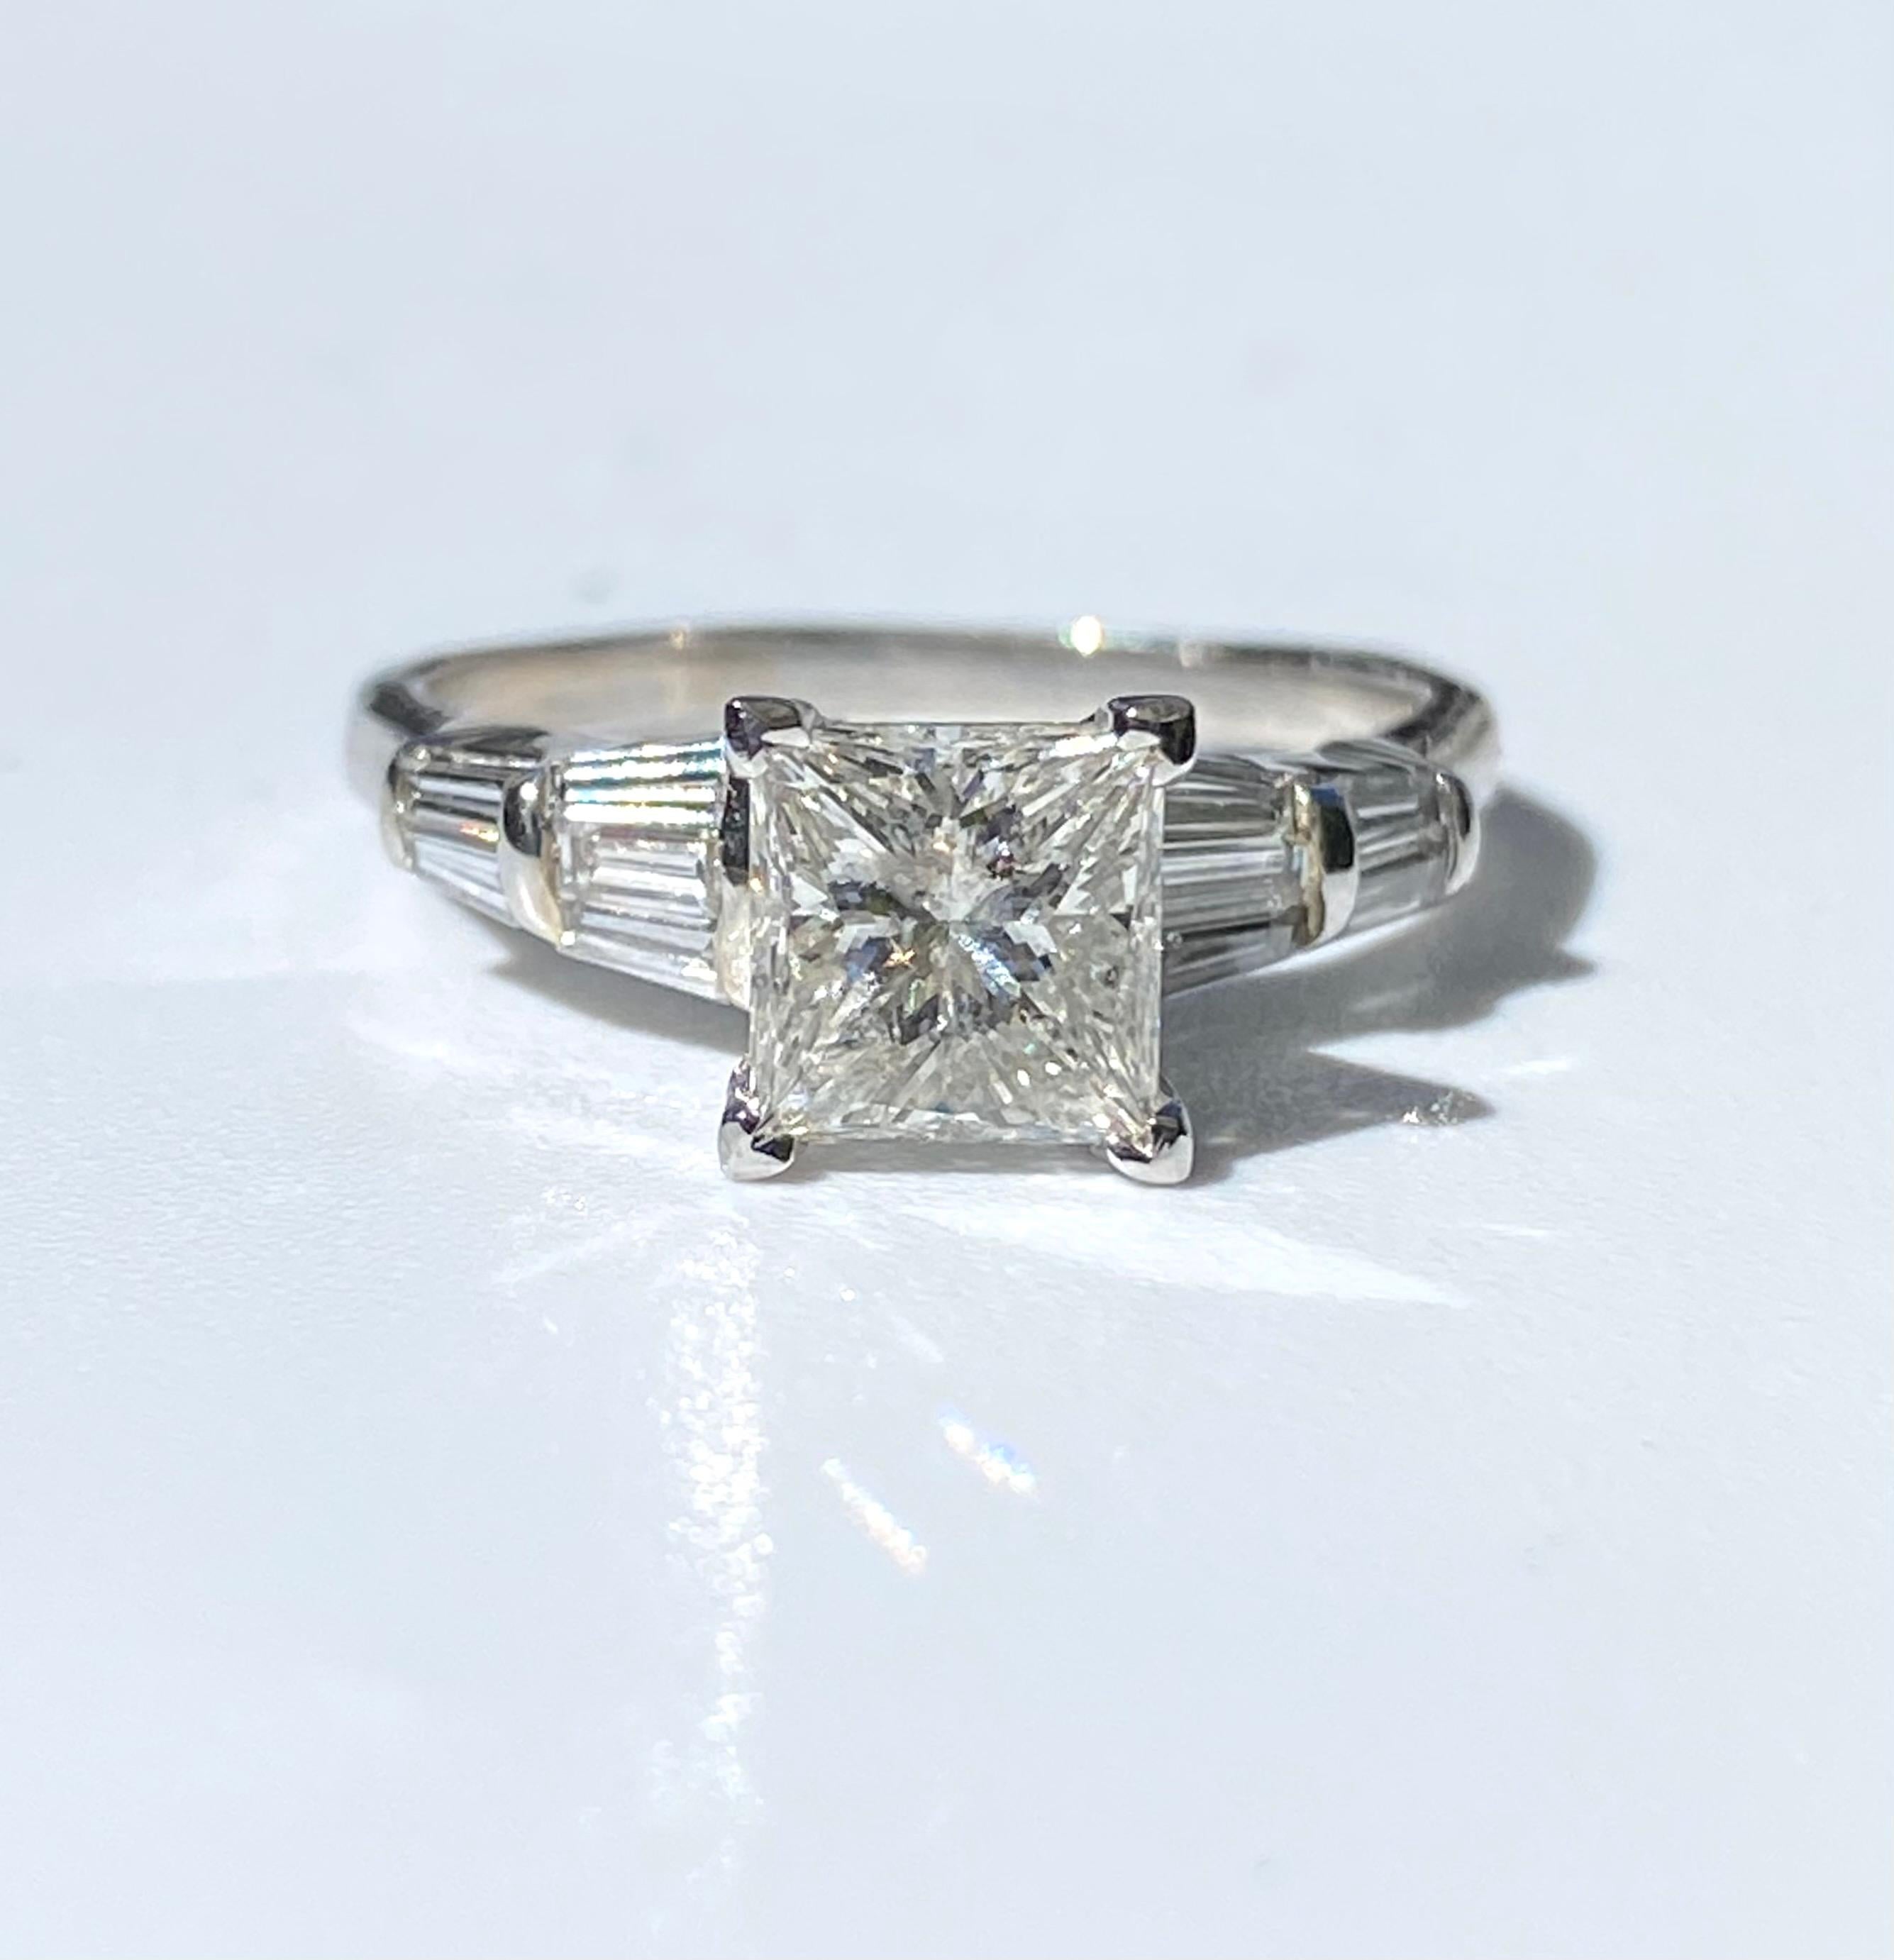 Lovely vintage diamond engagement ring centering a roughly 1.60 Carat Princess-Cut Diamonds, shouldered by 10 Princess-Cut Diamonds totaling 0.60 carats, and set in 14K Yellow Gold. 

Details:
✔ Stone: Diamond
✔ Center-Stone Weight: 1.60 Carats
✔